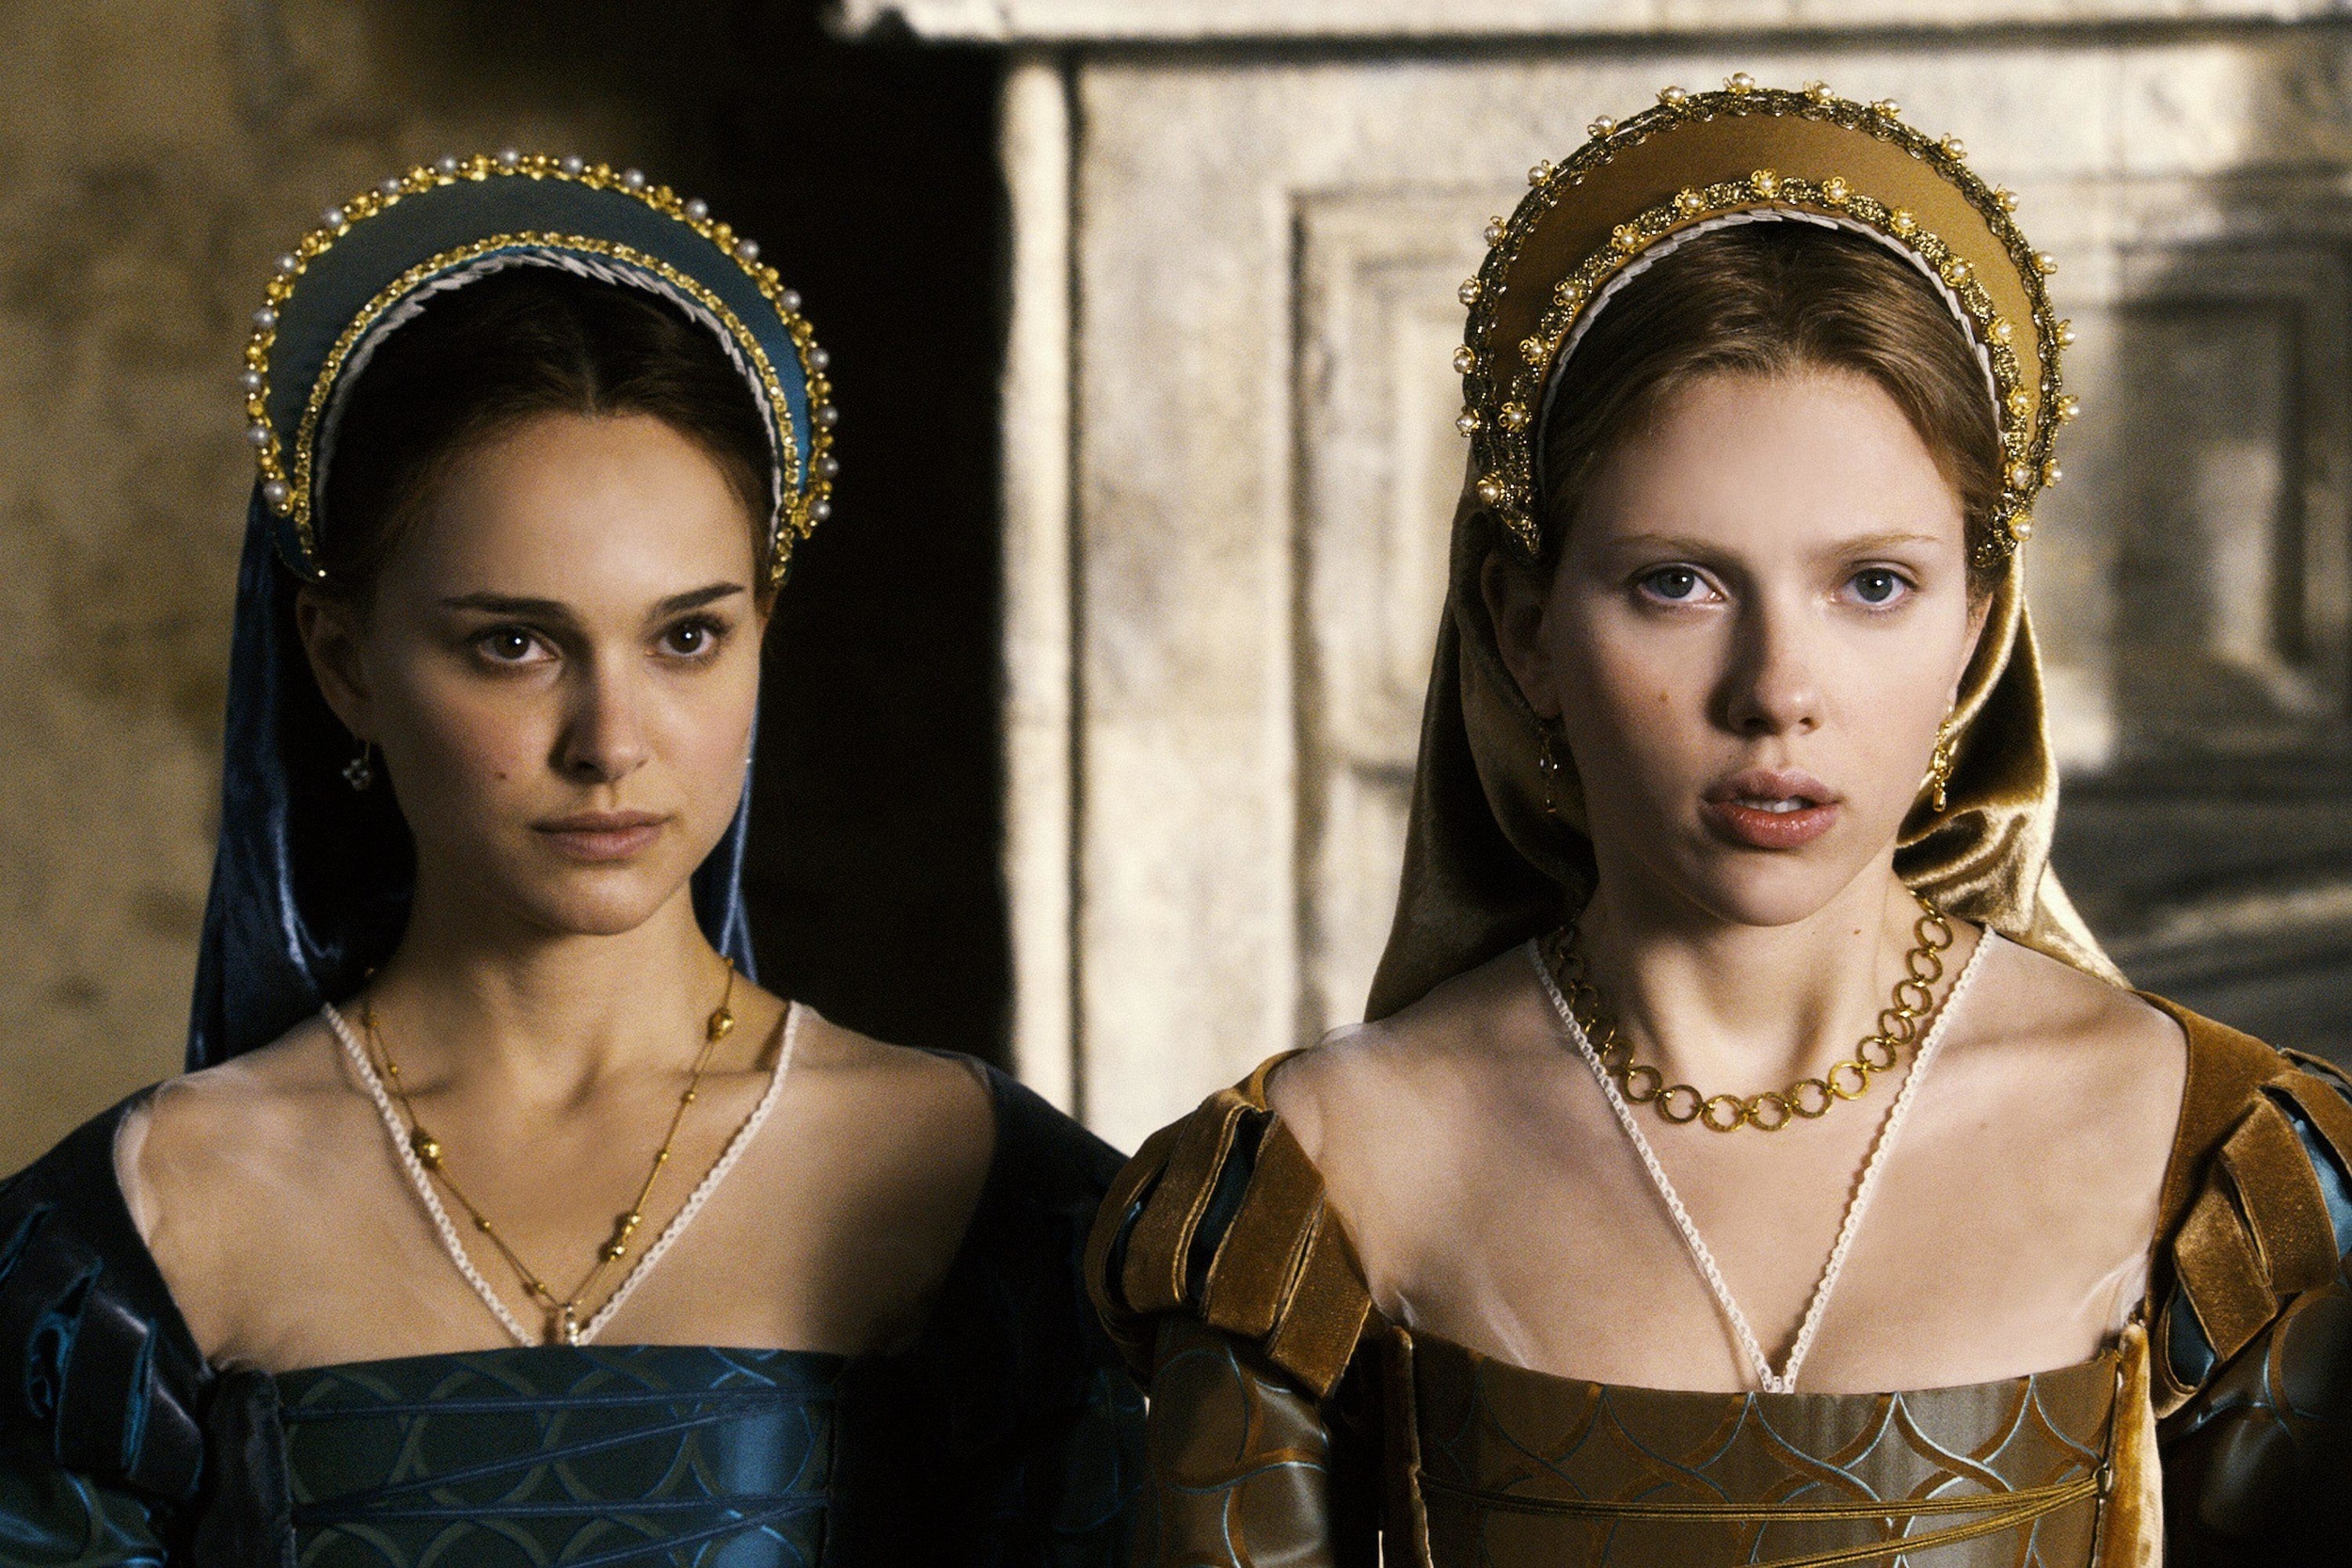 <p>Peter Morgan is back. This time, with a not-very-accurate retelling of the story of Anne and Mary Boleyn. Mary was Henry VIII’s mistress until he married her sister Anne, who became his second queen. That didn’t take either. Natalie Portman and Scarlett Johansson played the Boleyn sisters, while once again, Henry VIII plays second fiddle in a film.</p><p><a href='https://www.msn.com/en-us/community/channel/vid-cj9pqbr0vn9in2b6ddcd8sfgpfq6x6utp44fssrv6mc2gtybw0us'>Follow us on MSN to see more of our exclusive entertainment content.</a></p>